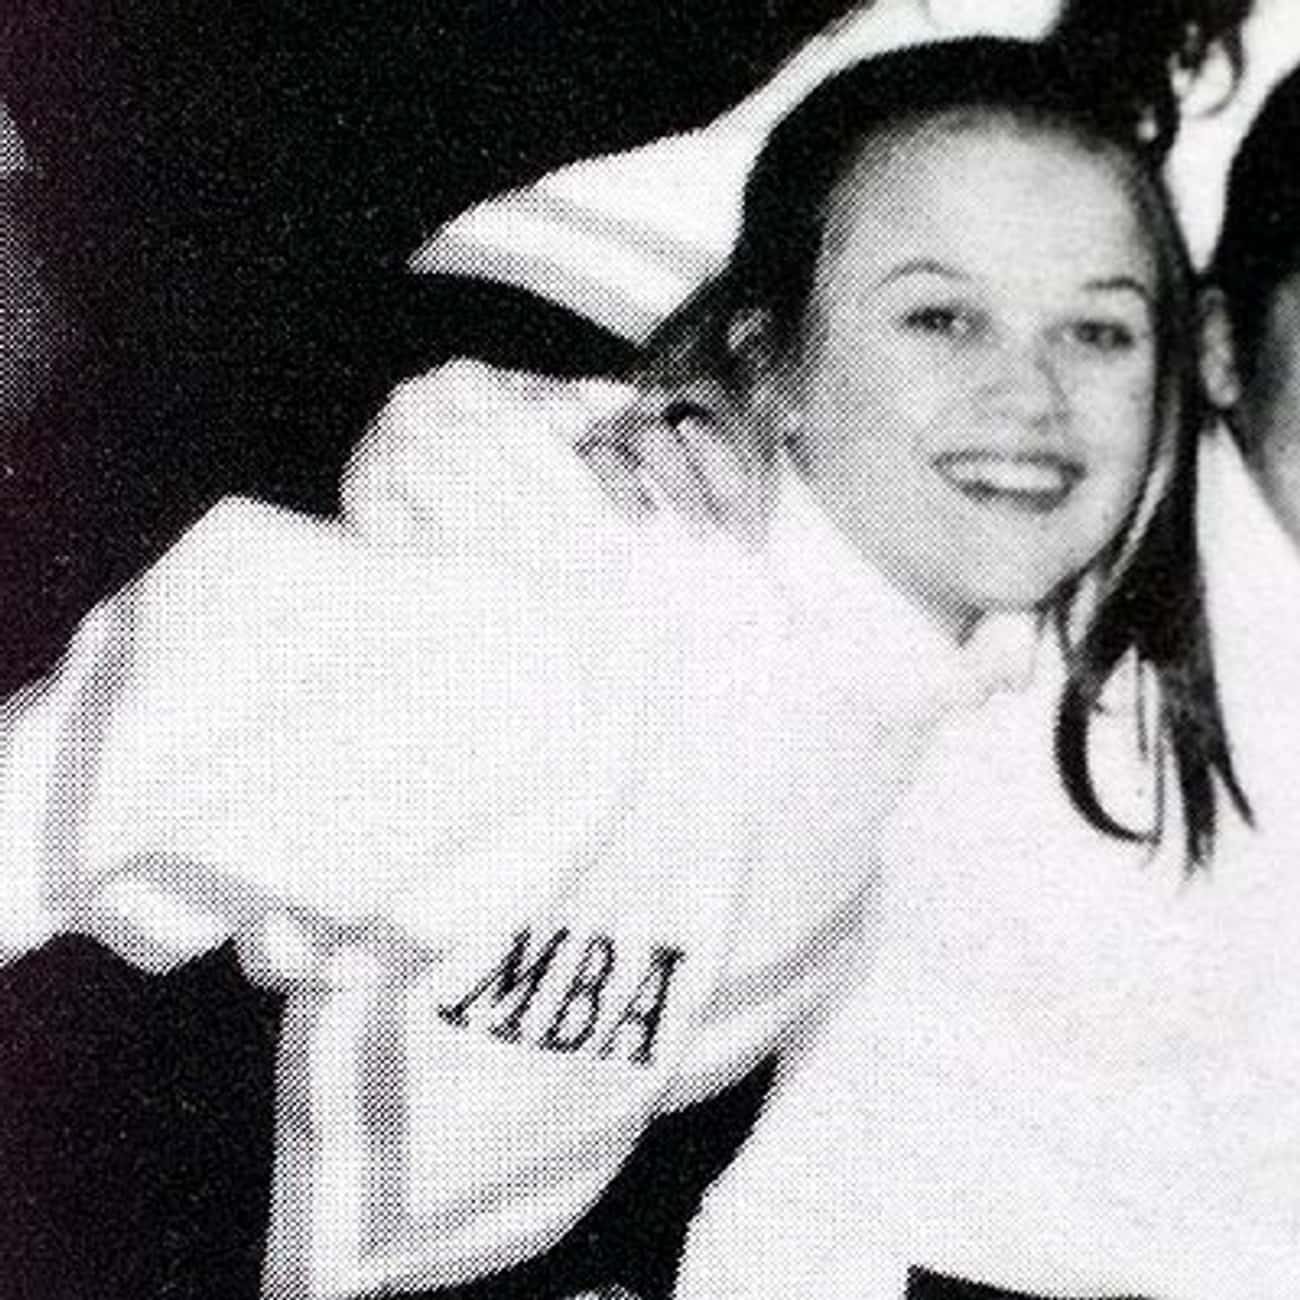 Young Reese Witherspoon in High School